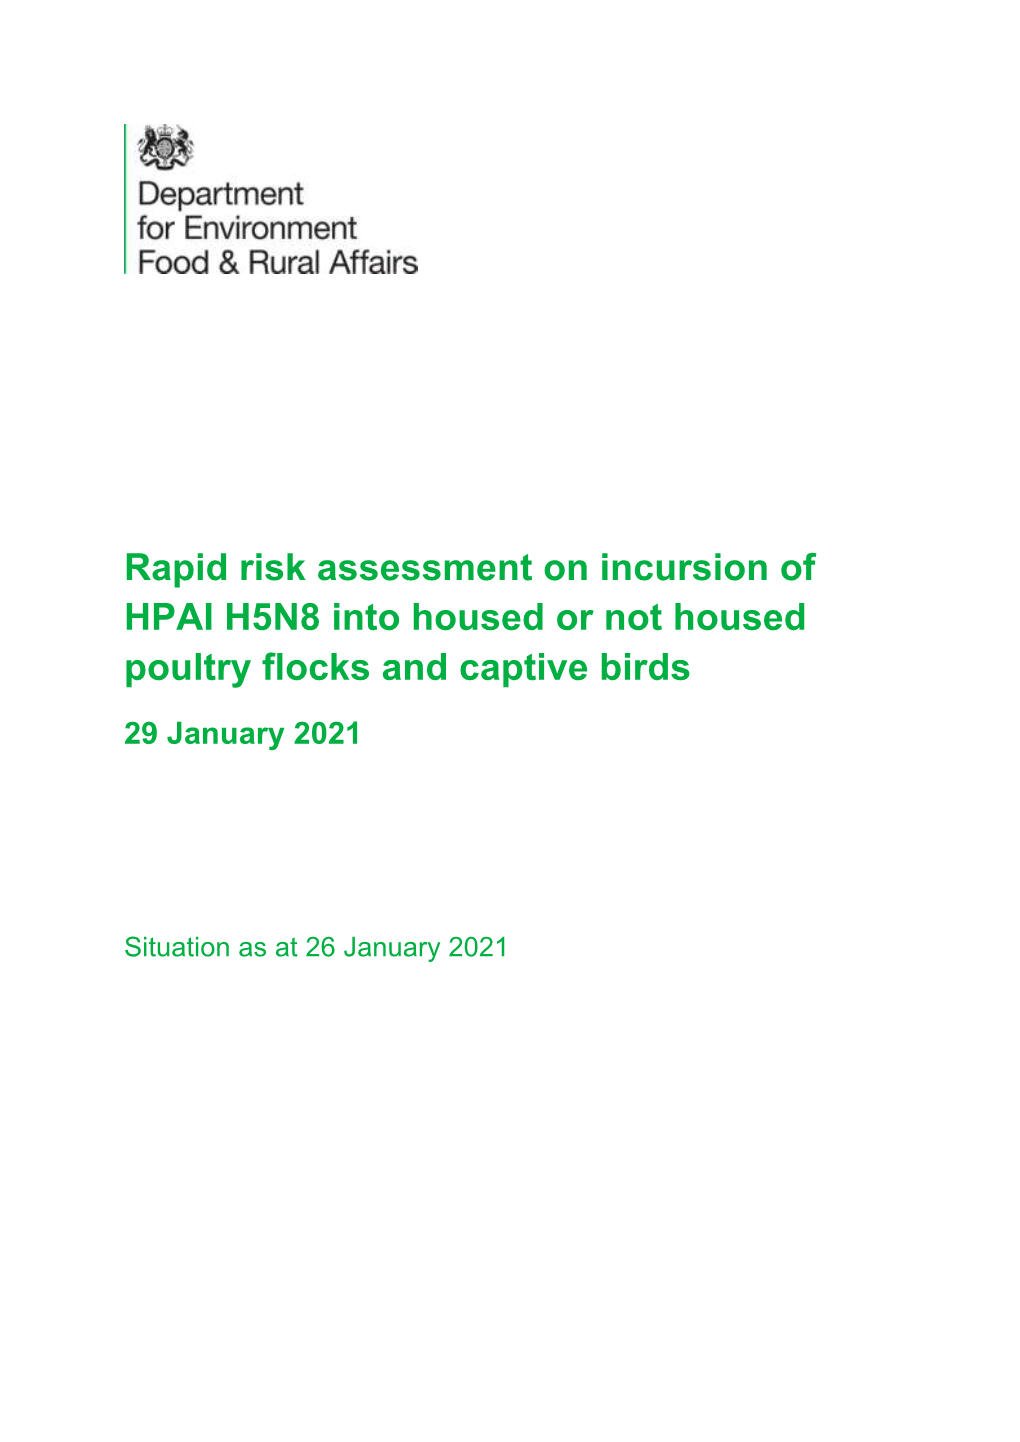 Rapid Risk Assessment on Incursion of HPAI H5N8 Into Housed Or Not Housed Poultry Flocks and Captive Birds